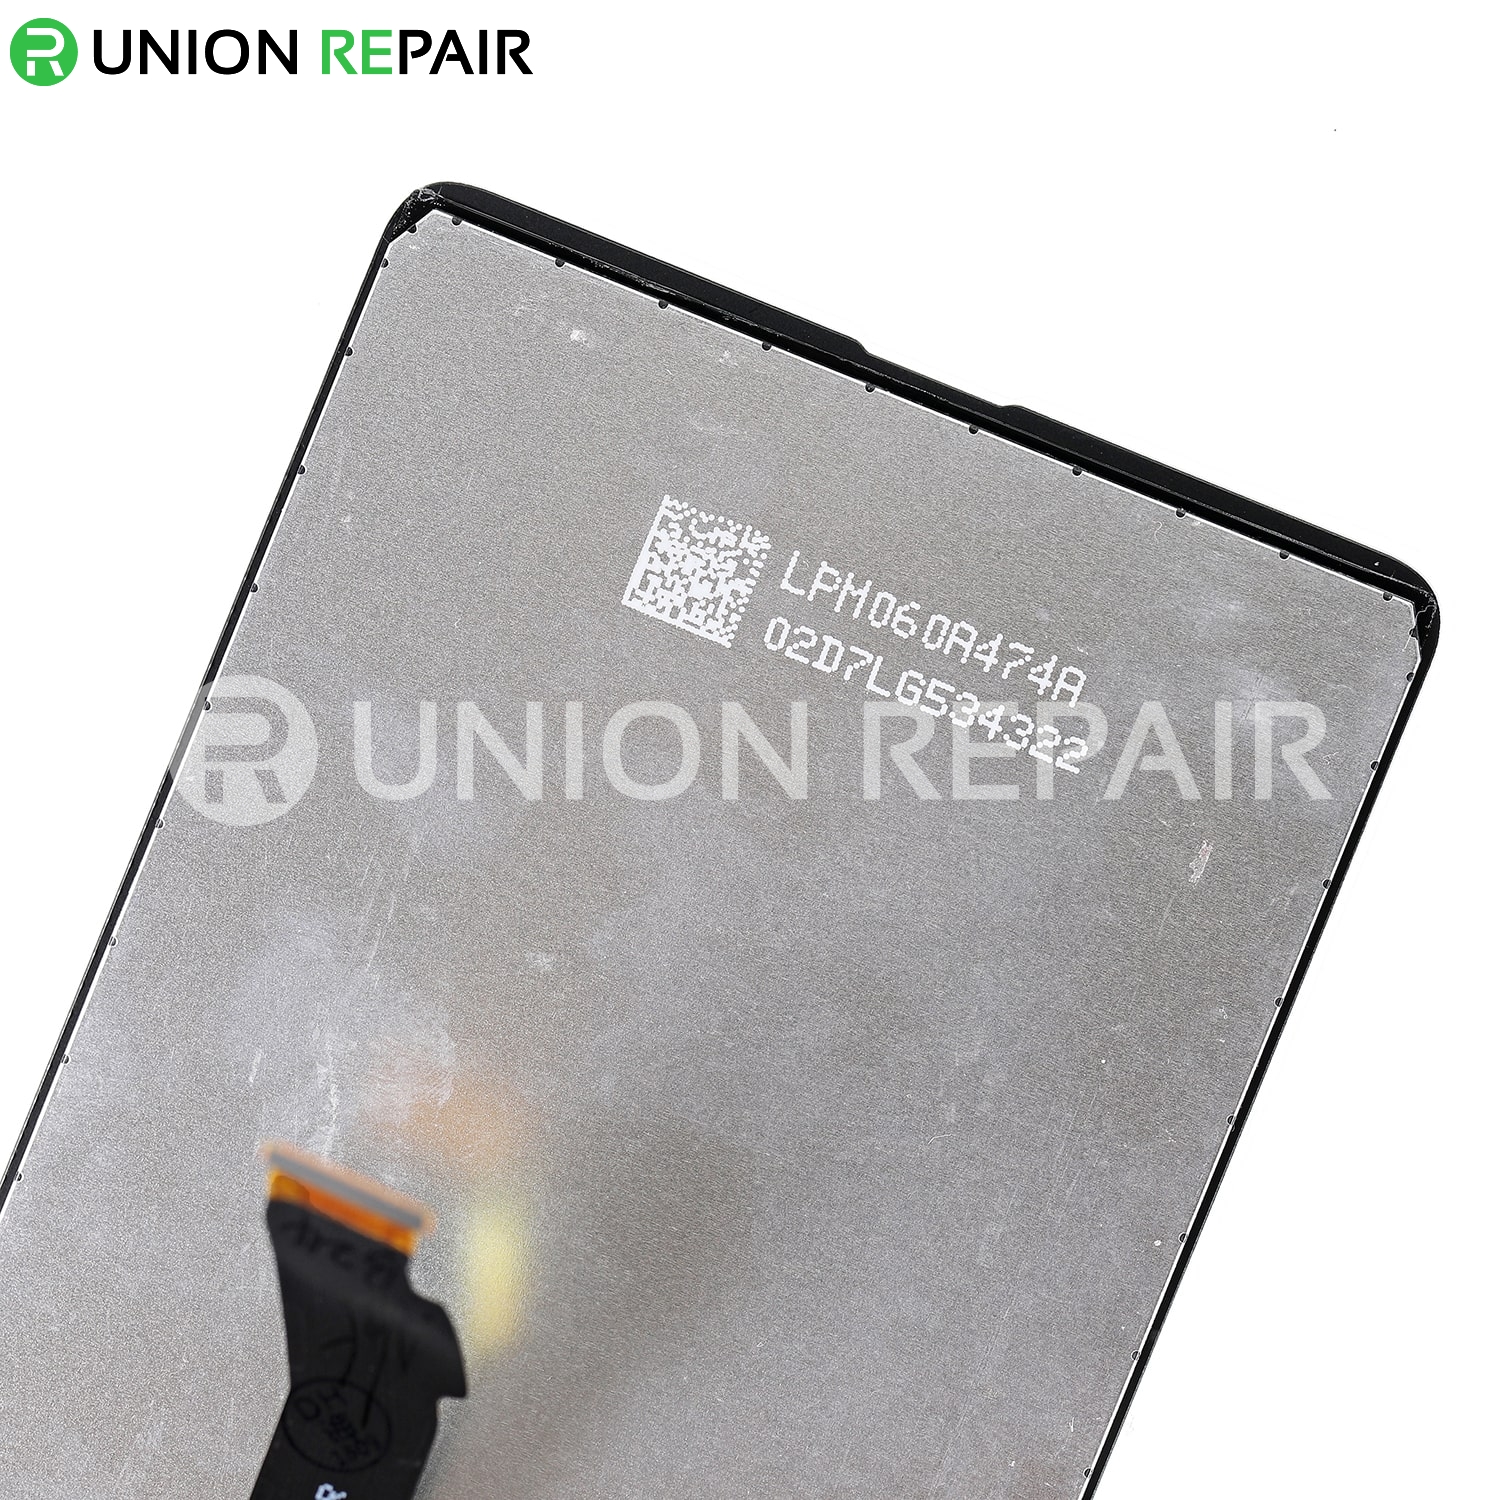 Replacement for XiaoMi MIX 2 LCD Screen Digitizer - Black